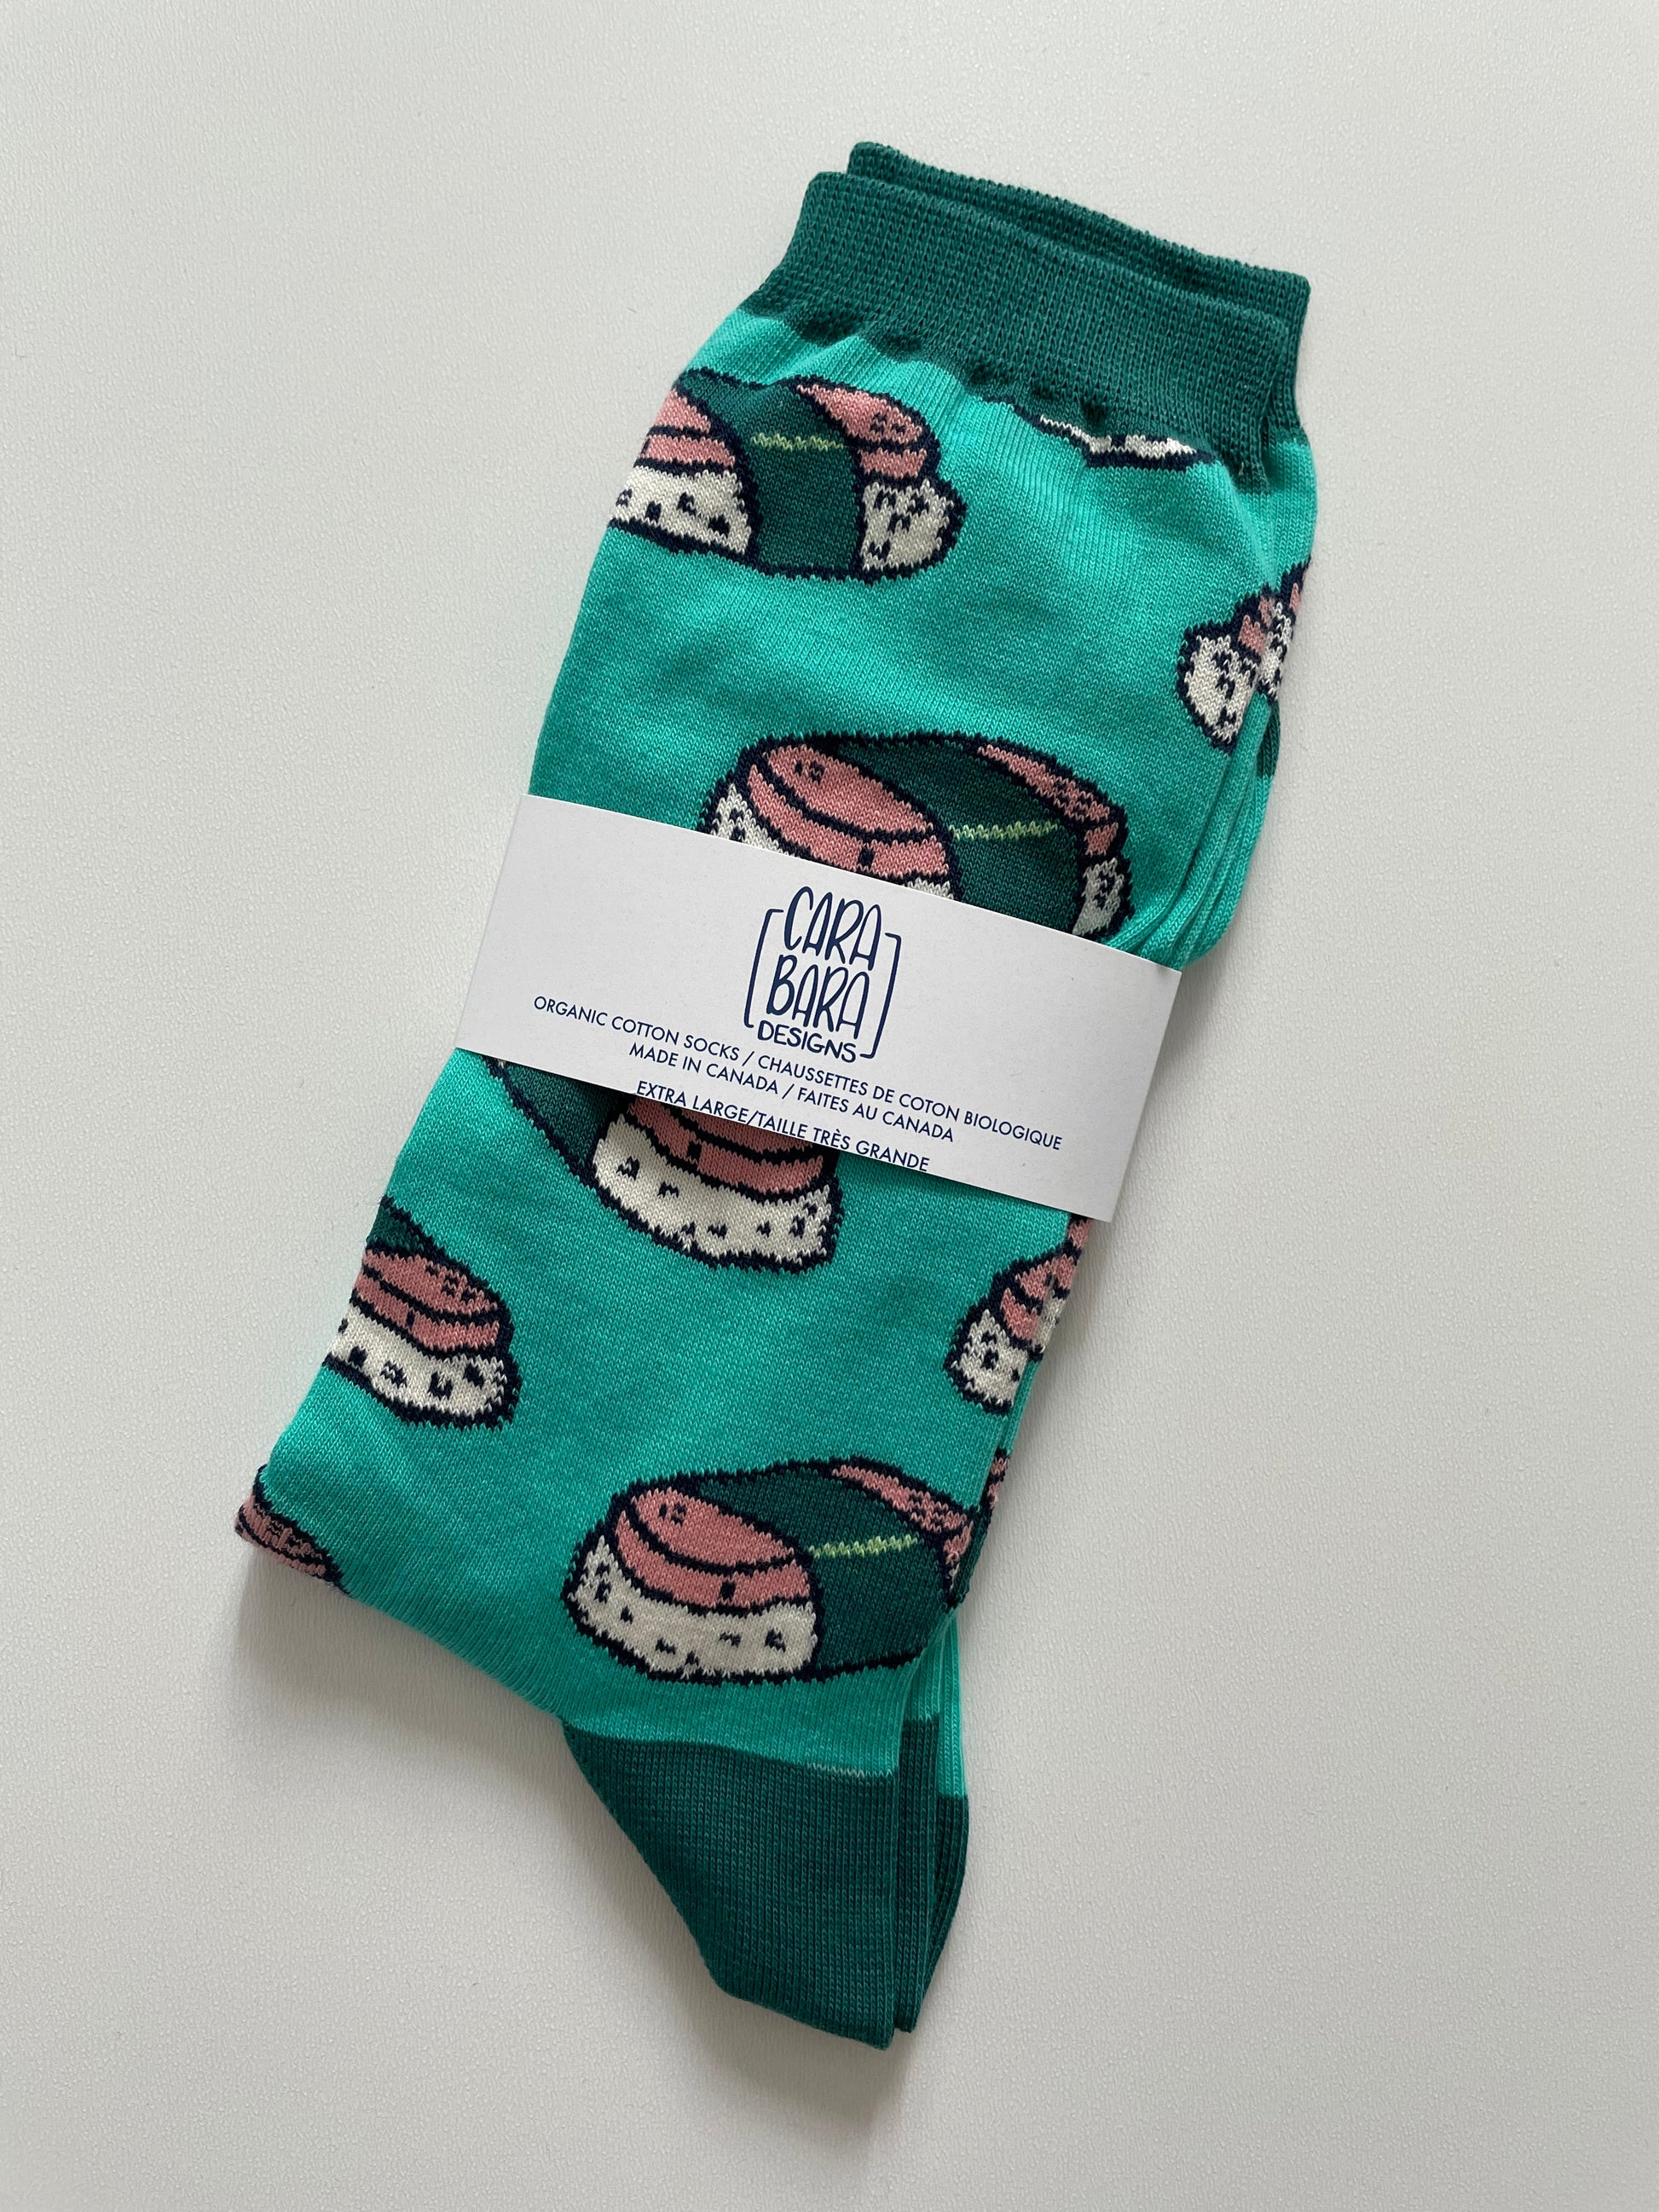 A pair of turquoise socks with green cuffs and patterned with pink and green musubi is folded, packed labelled with the Carabara Designs logo, and the words organic cotton socks, made in Canada, extra large, in English and French.